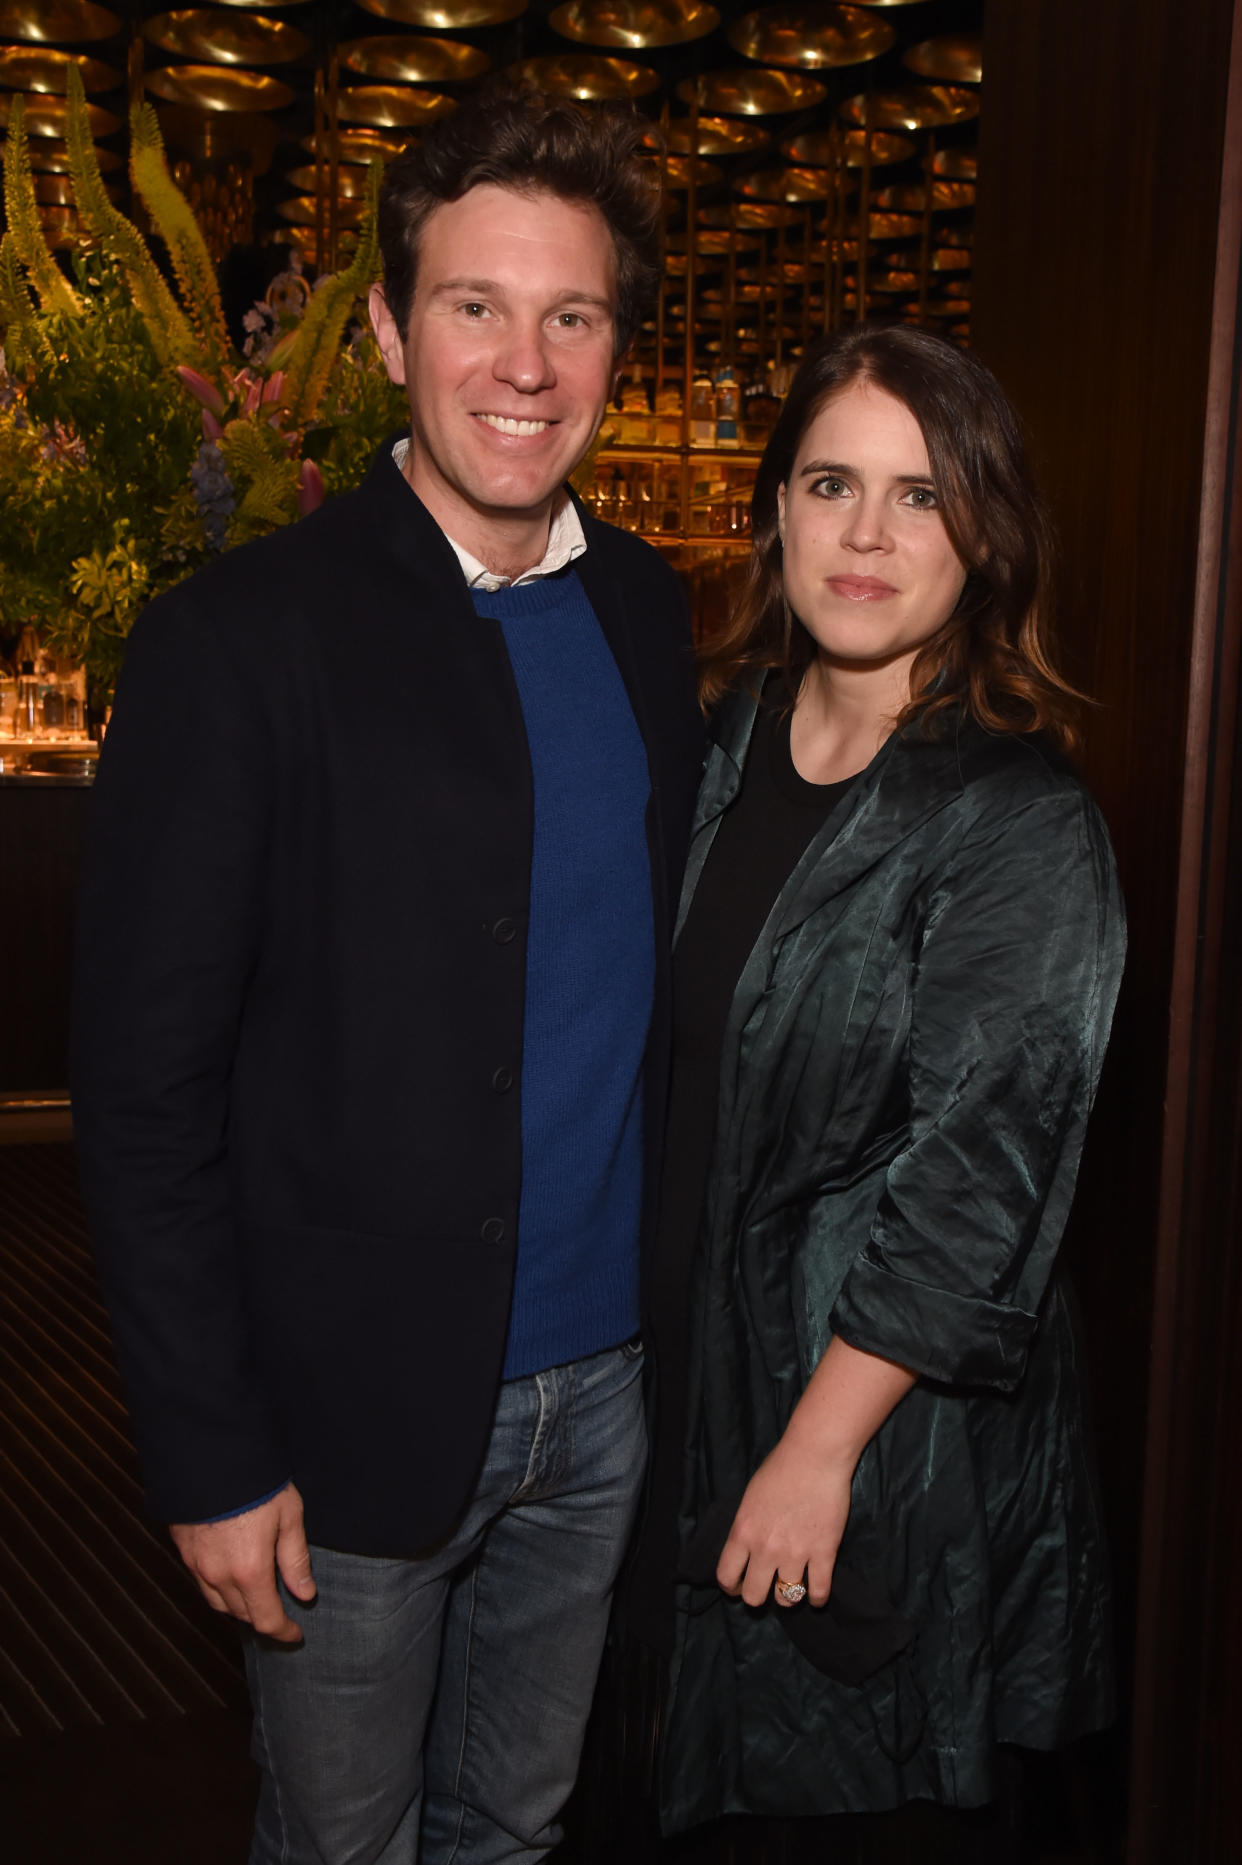 LONDON, ENGLAND - JUNE 22:  Jack Brooksbank and Princess Eugenie attend an exclusive dinner hosted by Poppy Jamie to celebrate the launch of her first book 